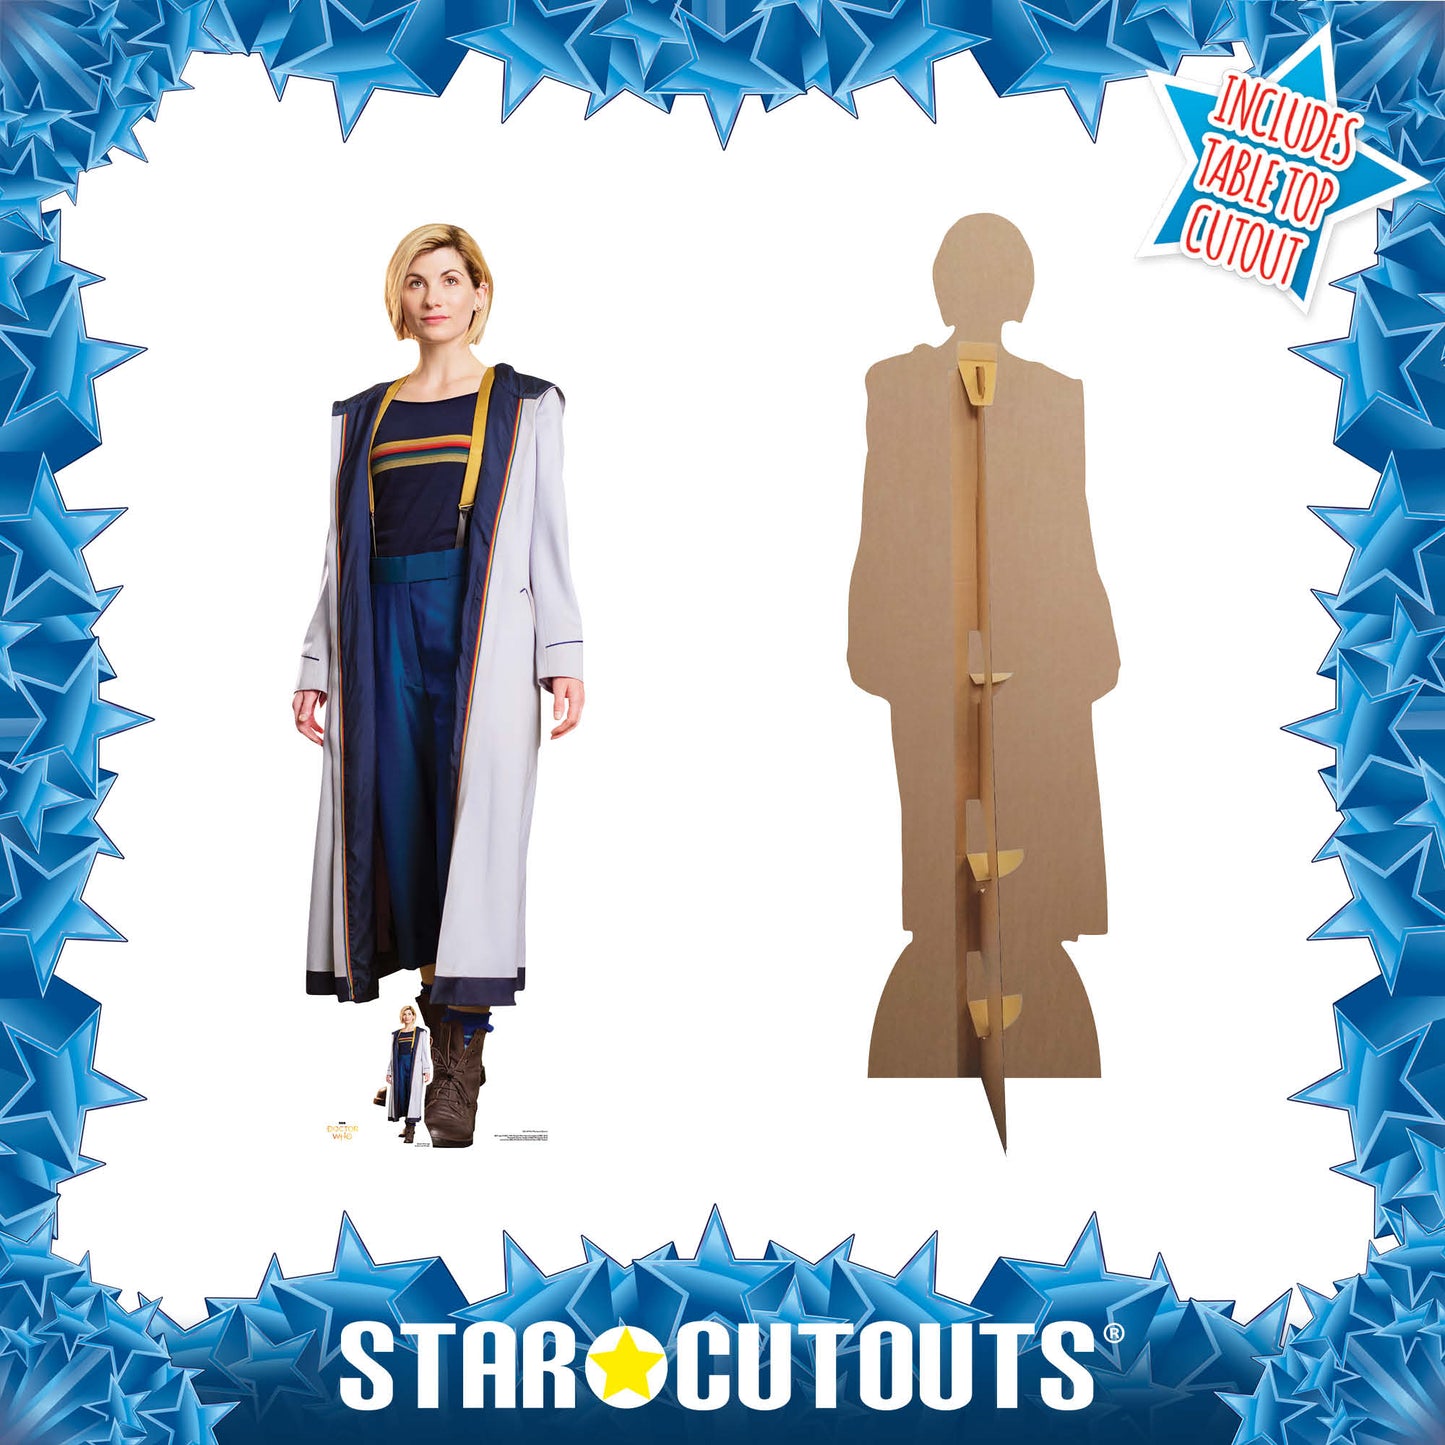 Jodie Whittaker 13th Doctor Lifesize   Doctor Who Cardboard Cut Out Height 168cm - Star Cutouts